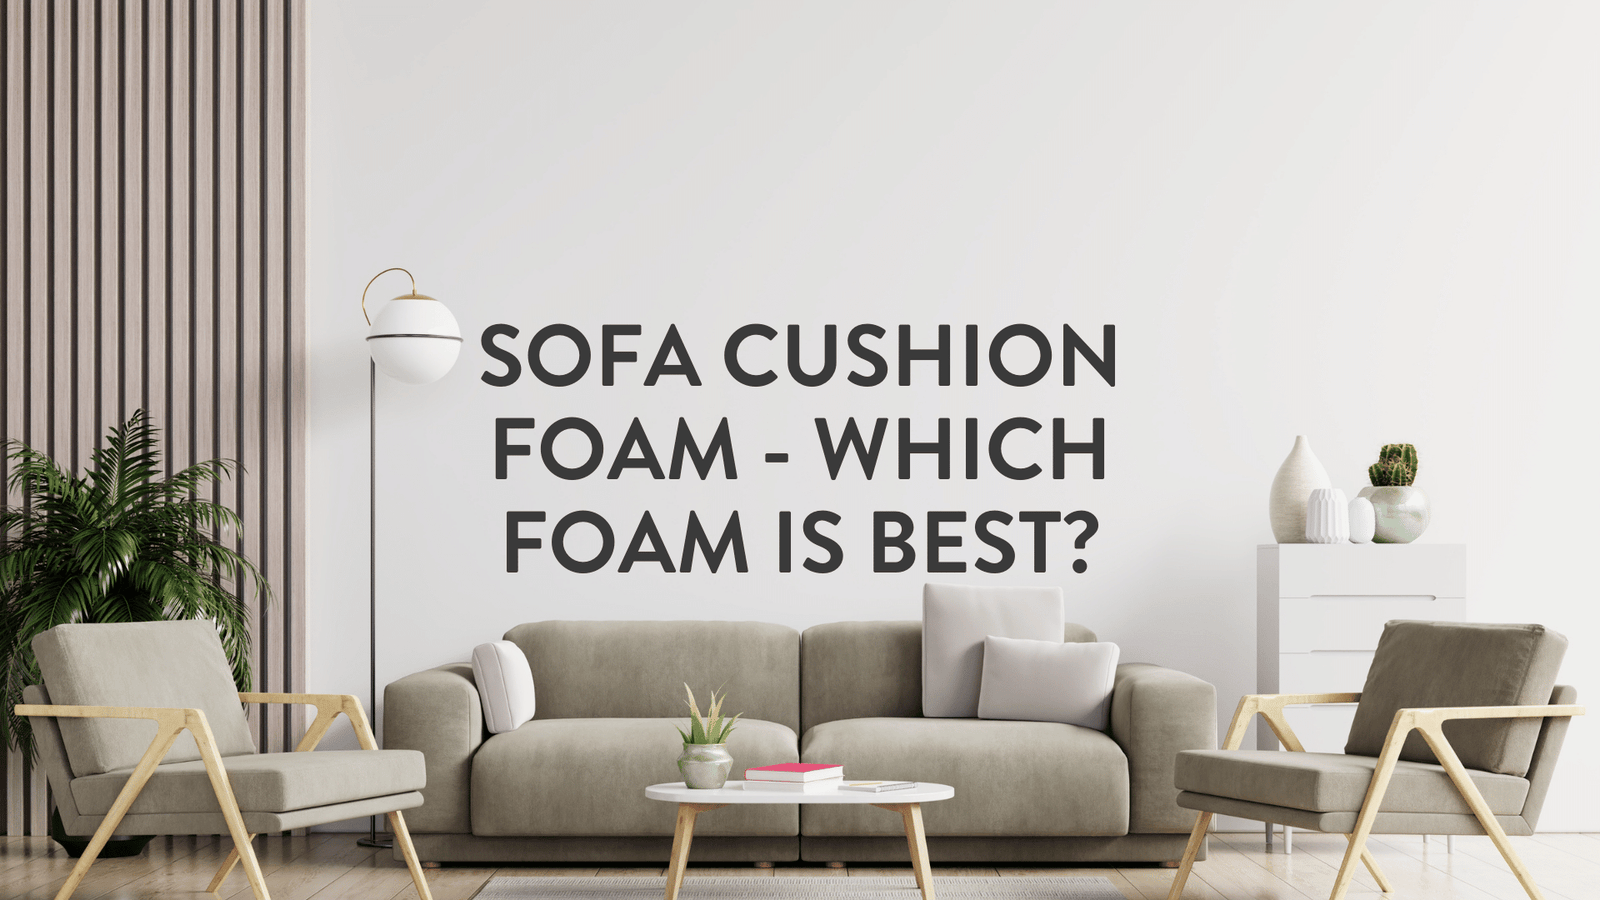 The Best Foam to Use for Sofa Cushions: Good, Better, Best